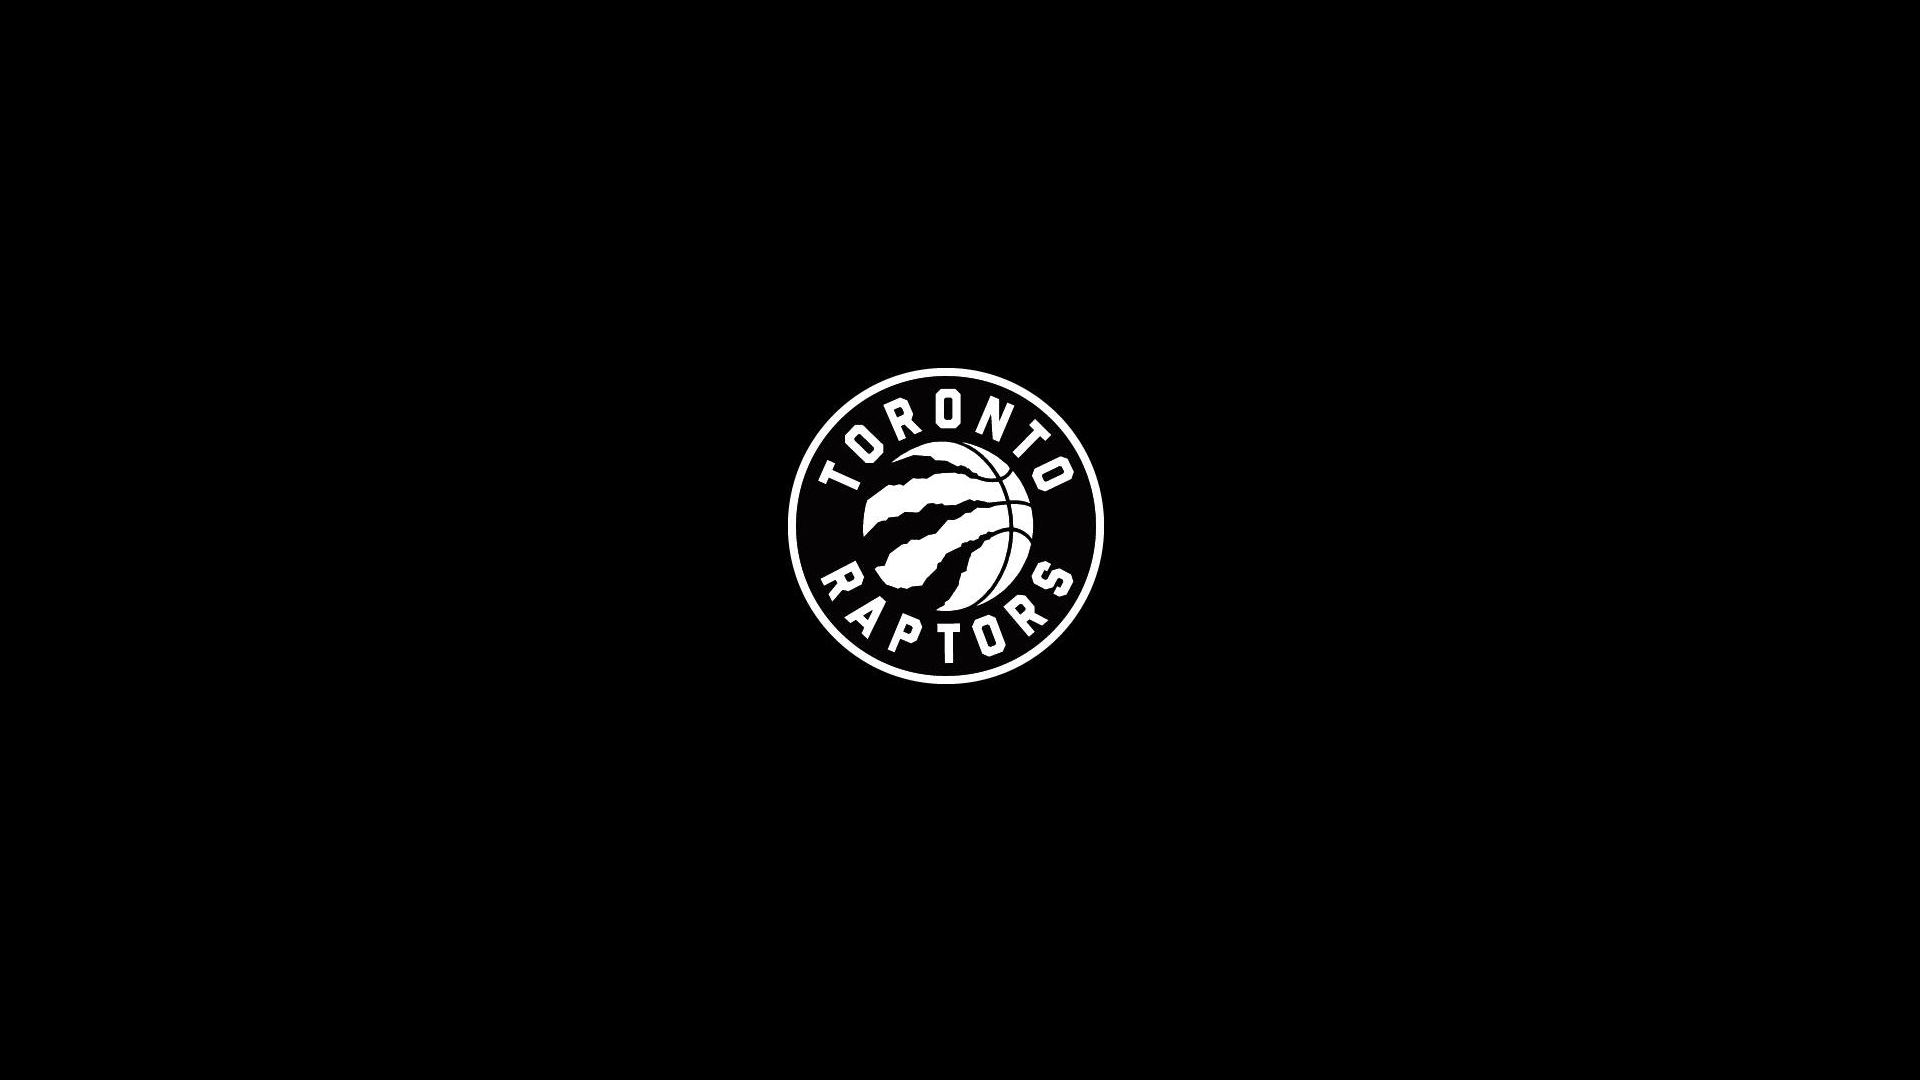 Wallpaper Desktop Toronto Raptors HD with image dimensions 1920x1080 pixel. You can make this wallpaper for your Desktop Computer Backgrounds, Windows or Mac Screensavers, iPhone Lock screen, Tablet or Android and another Mobile Phone device